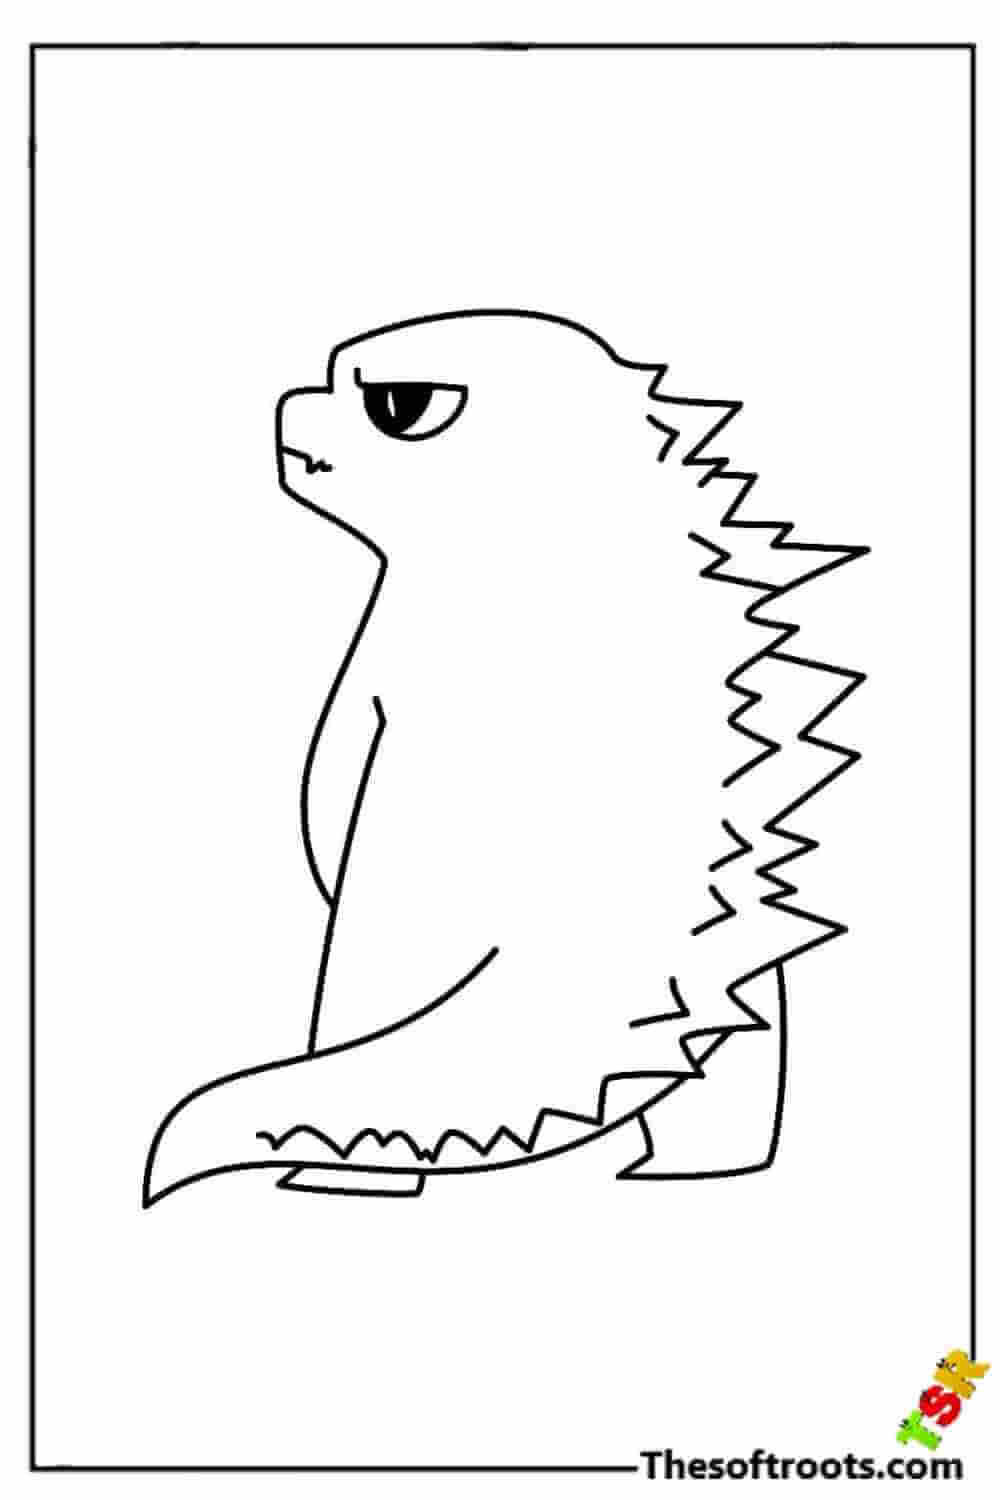 Adorable Godzilla coloring pages